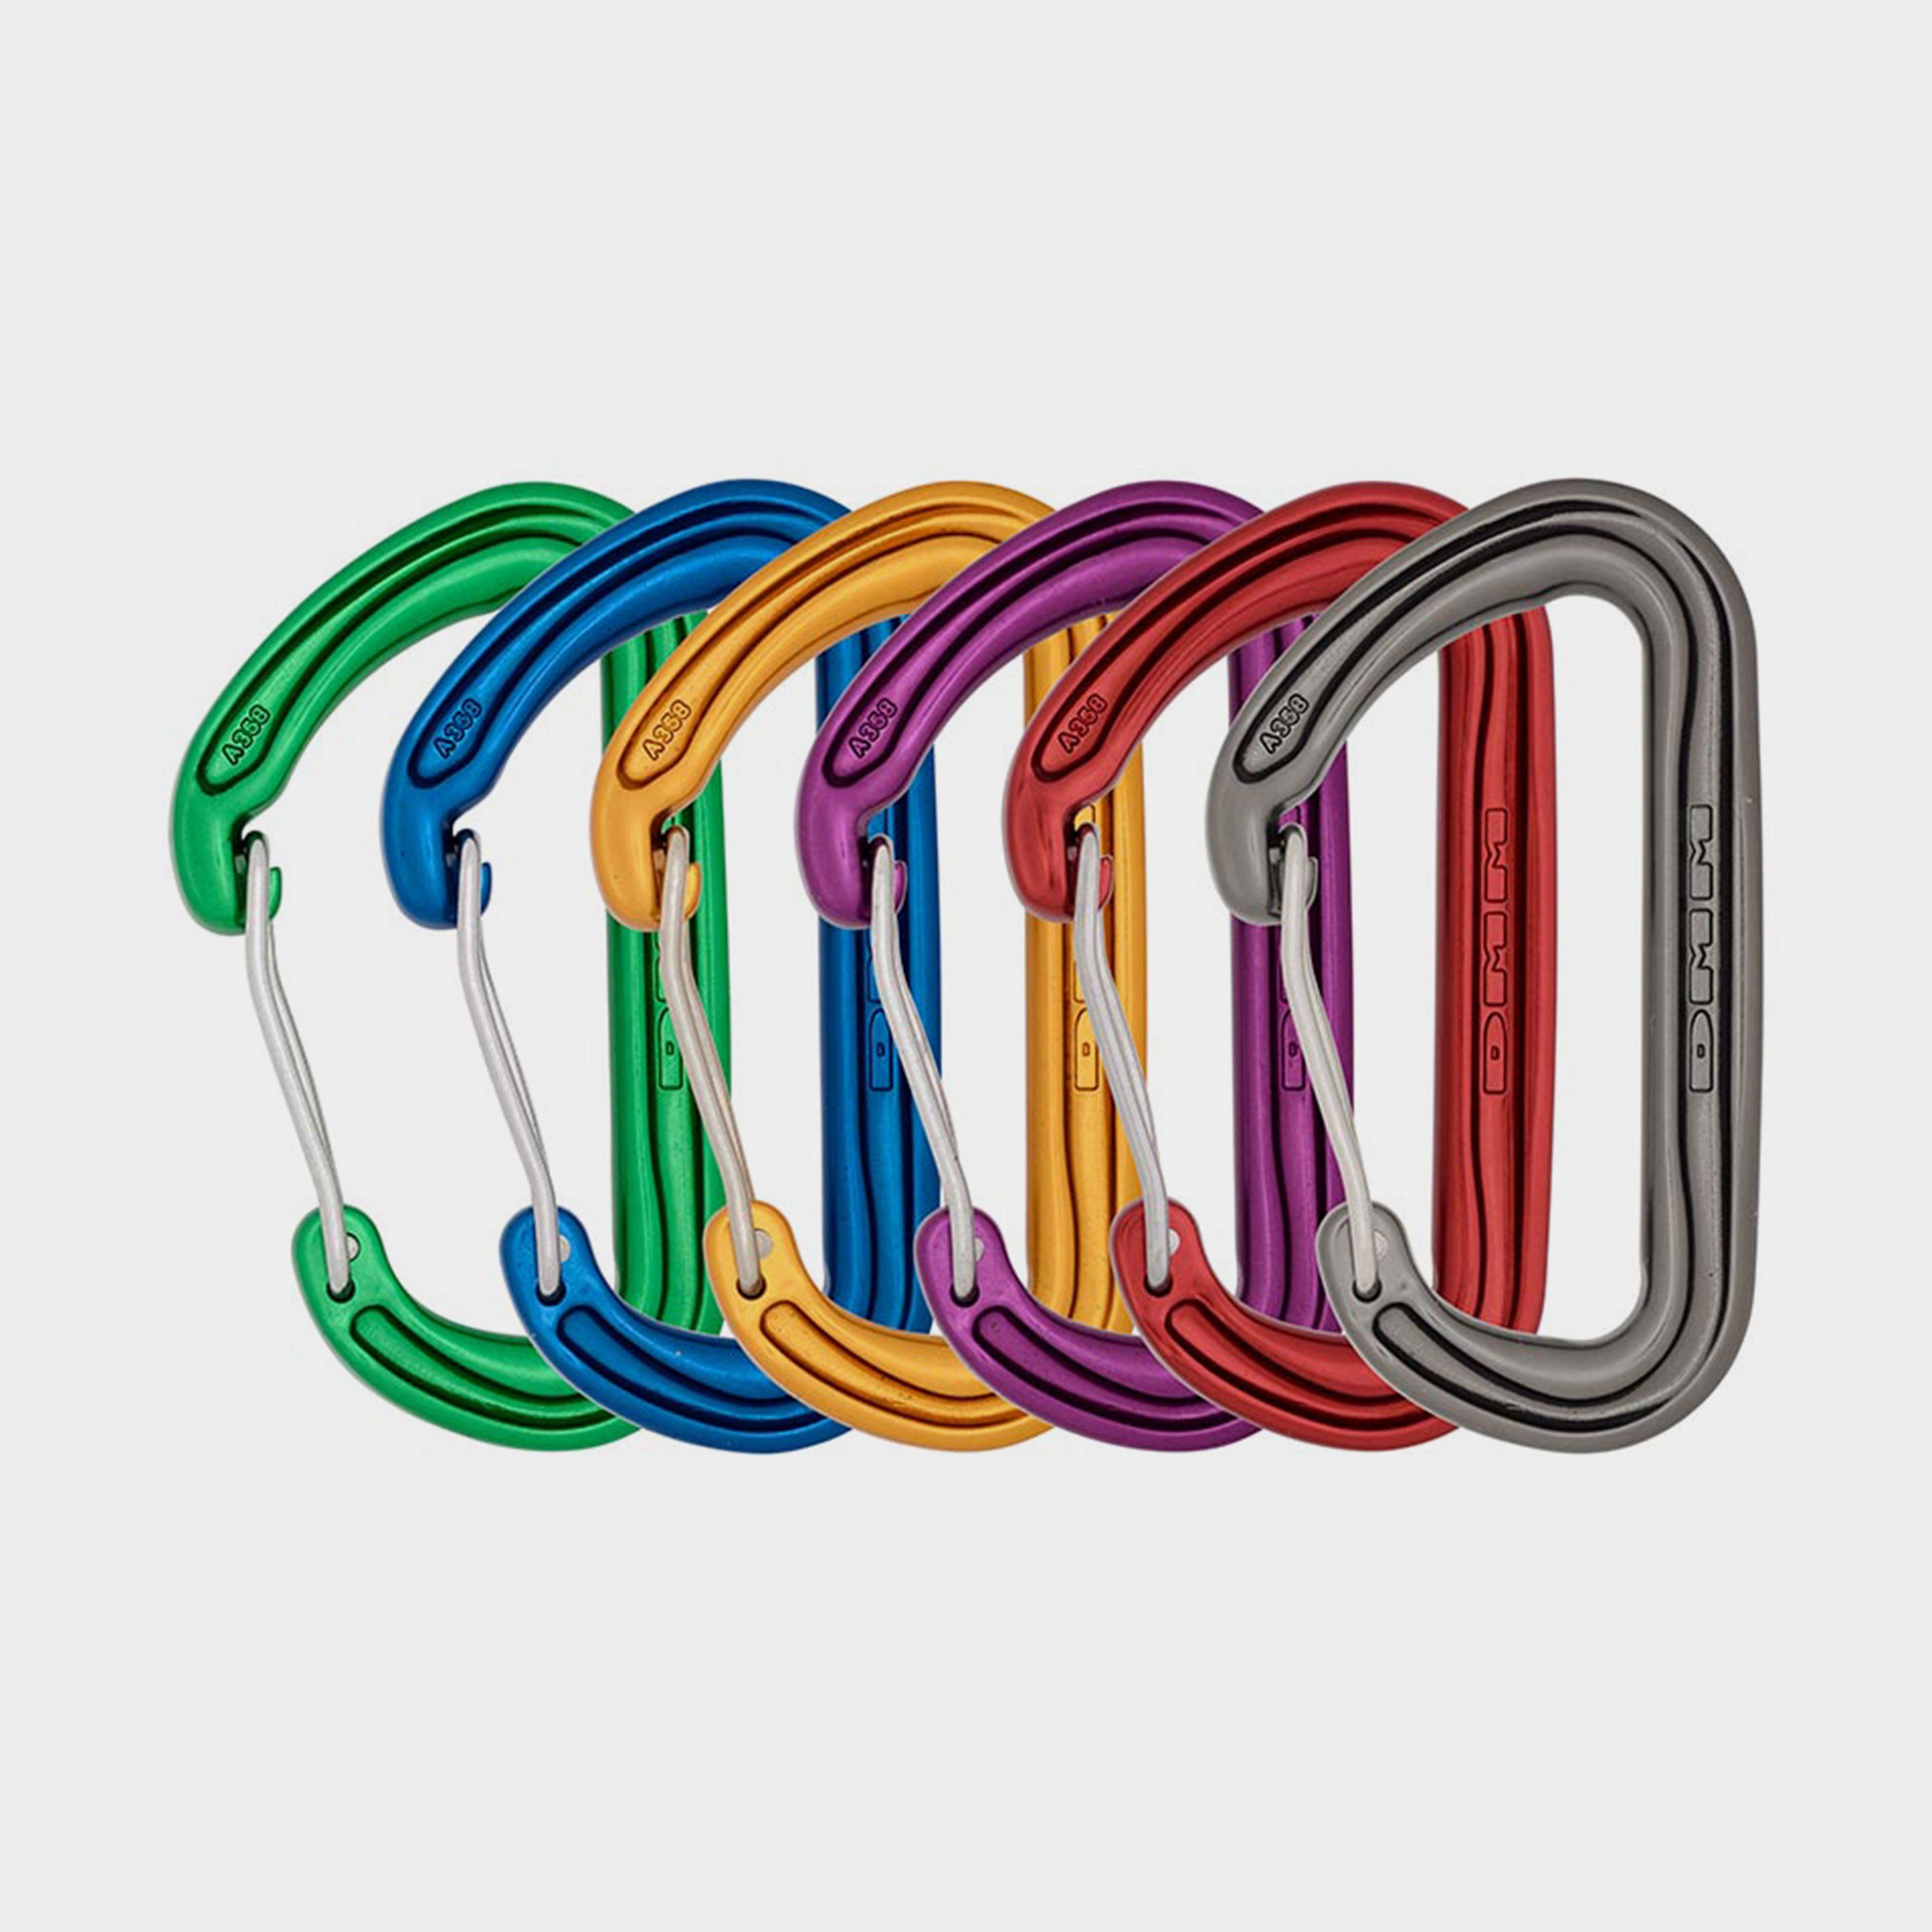 Photos - Climbing Gear DMM Spectre Quickdraw 2 6 Pack, Multi Coloured 